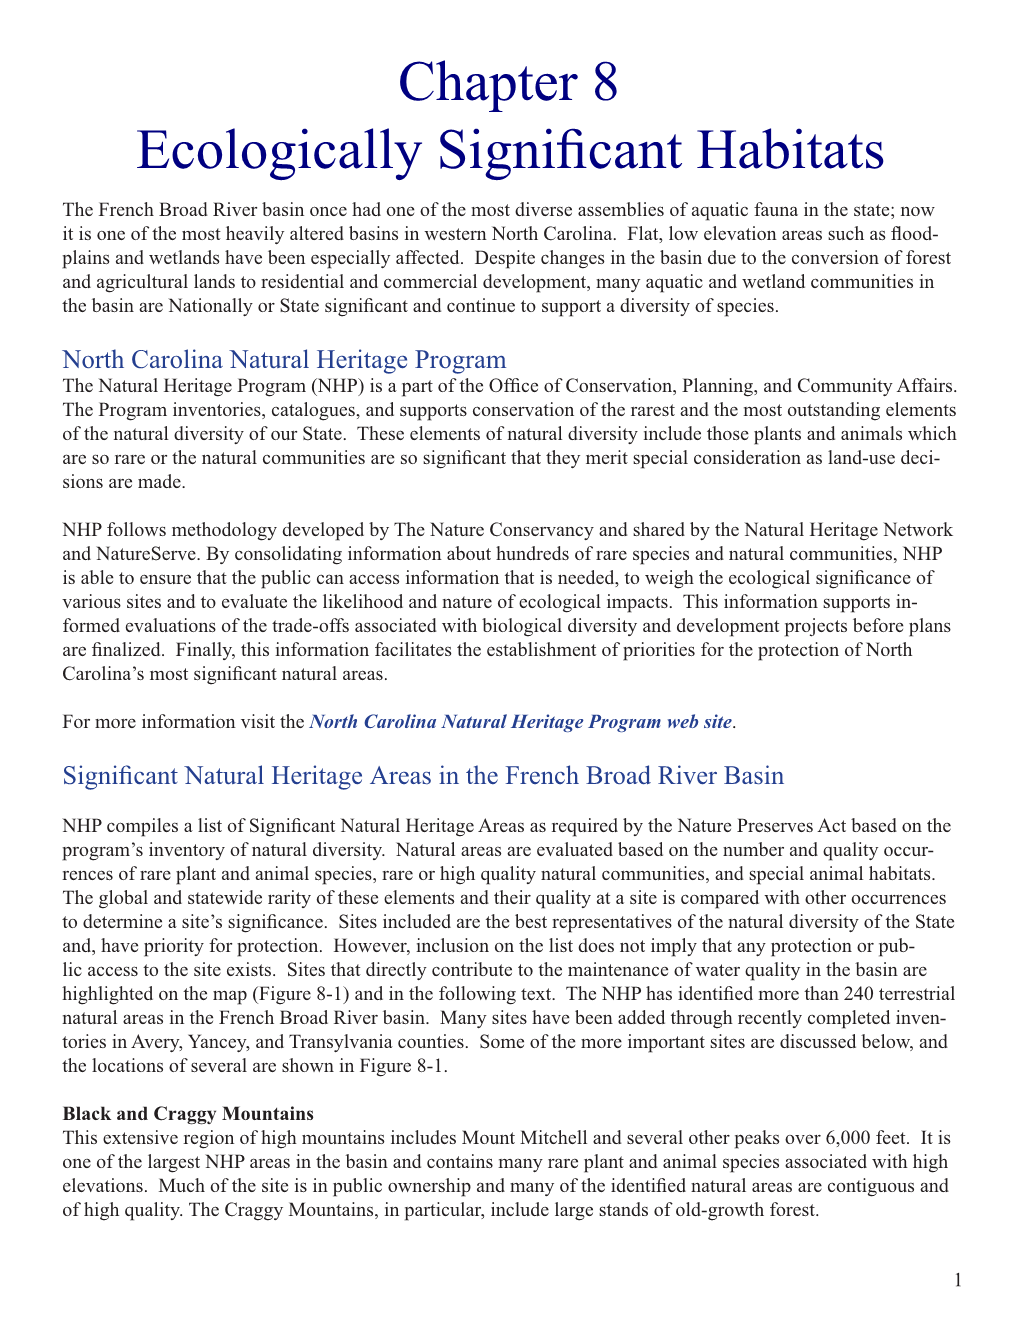 Chapter 8 Ecologically Significant Habitats